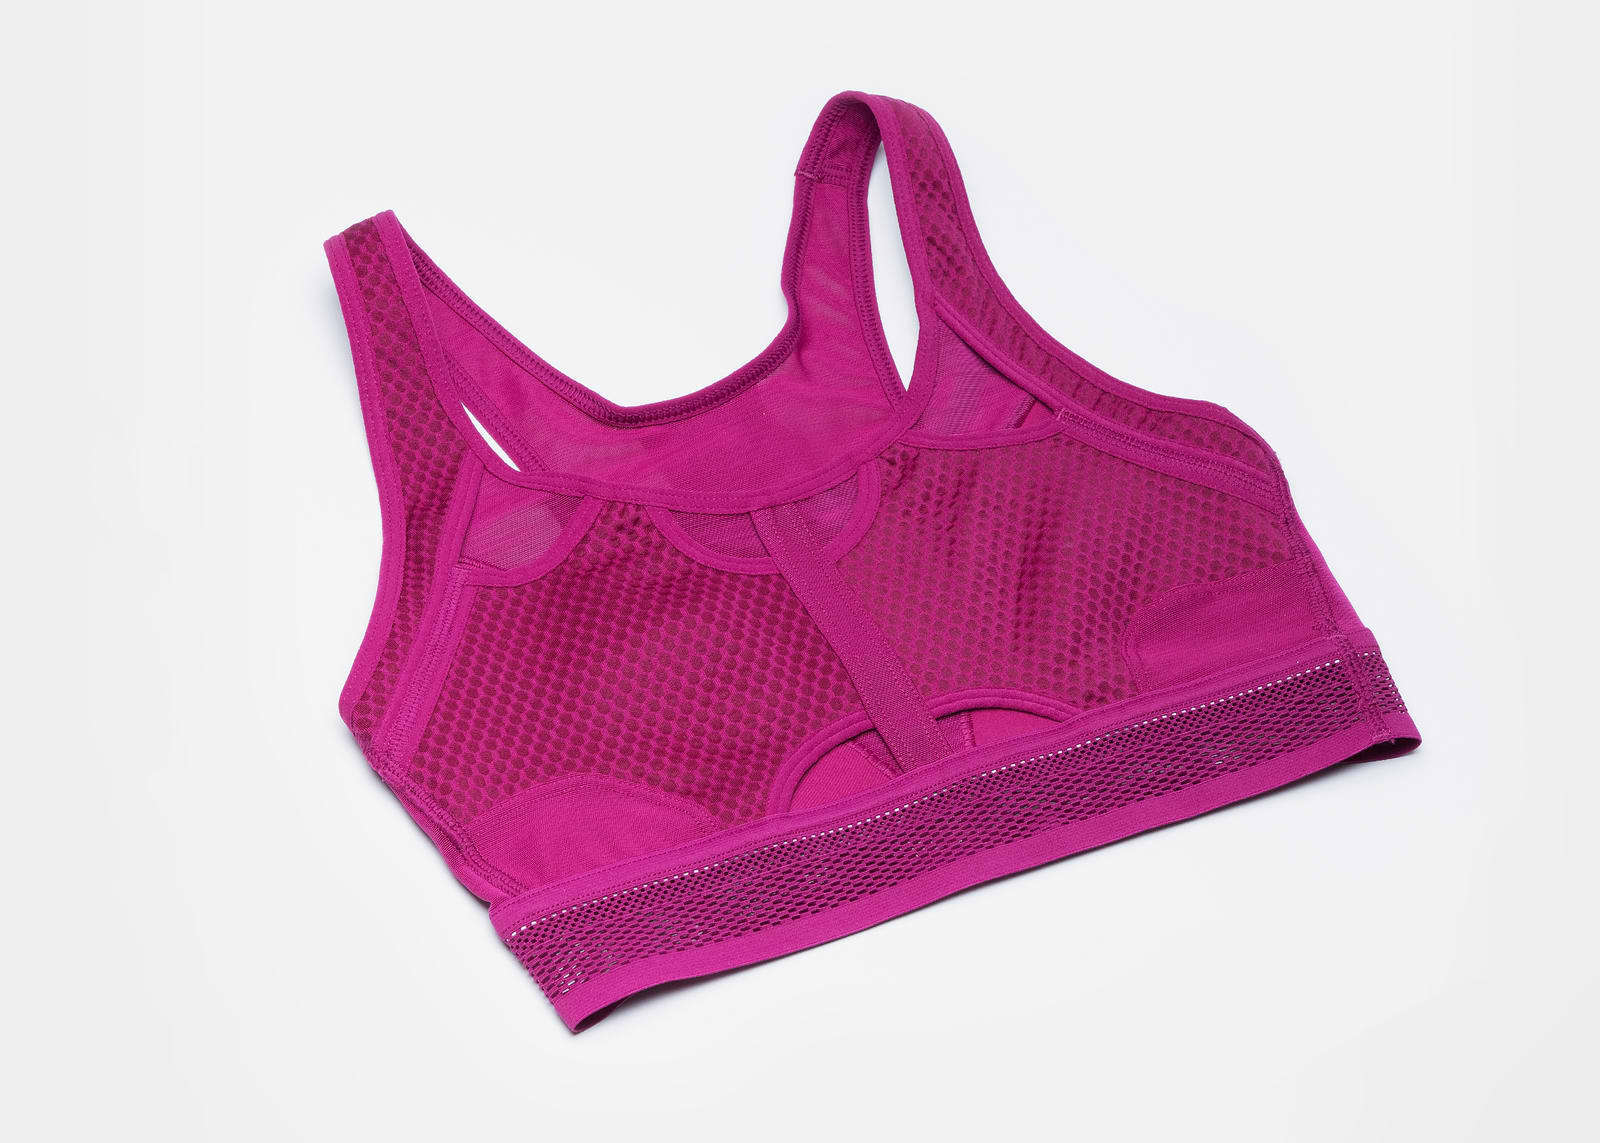 How to Wash & Care for Sports Bras